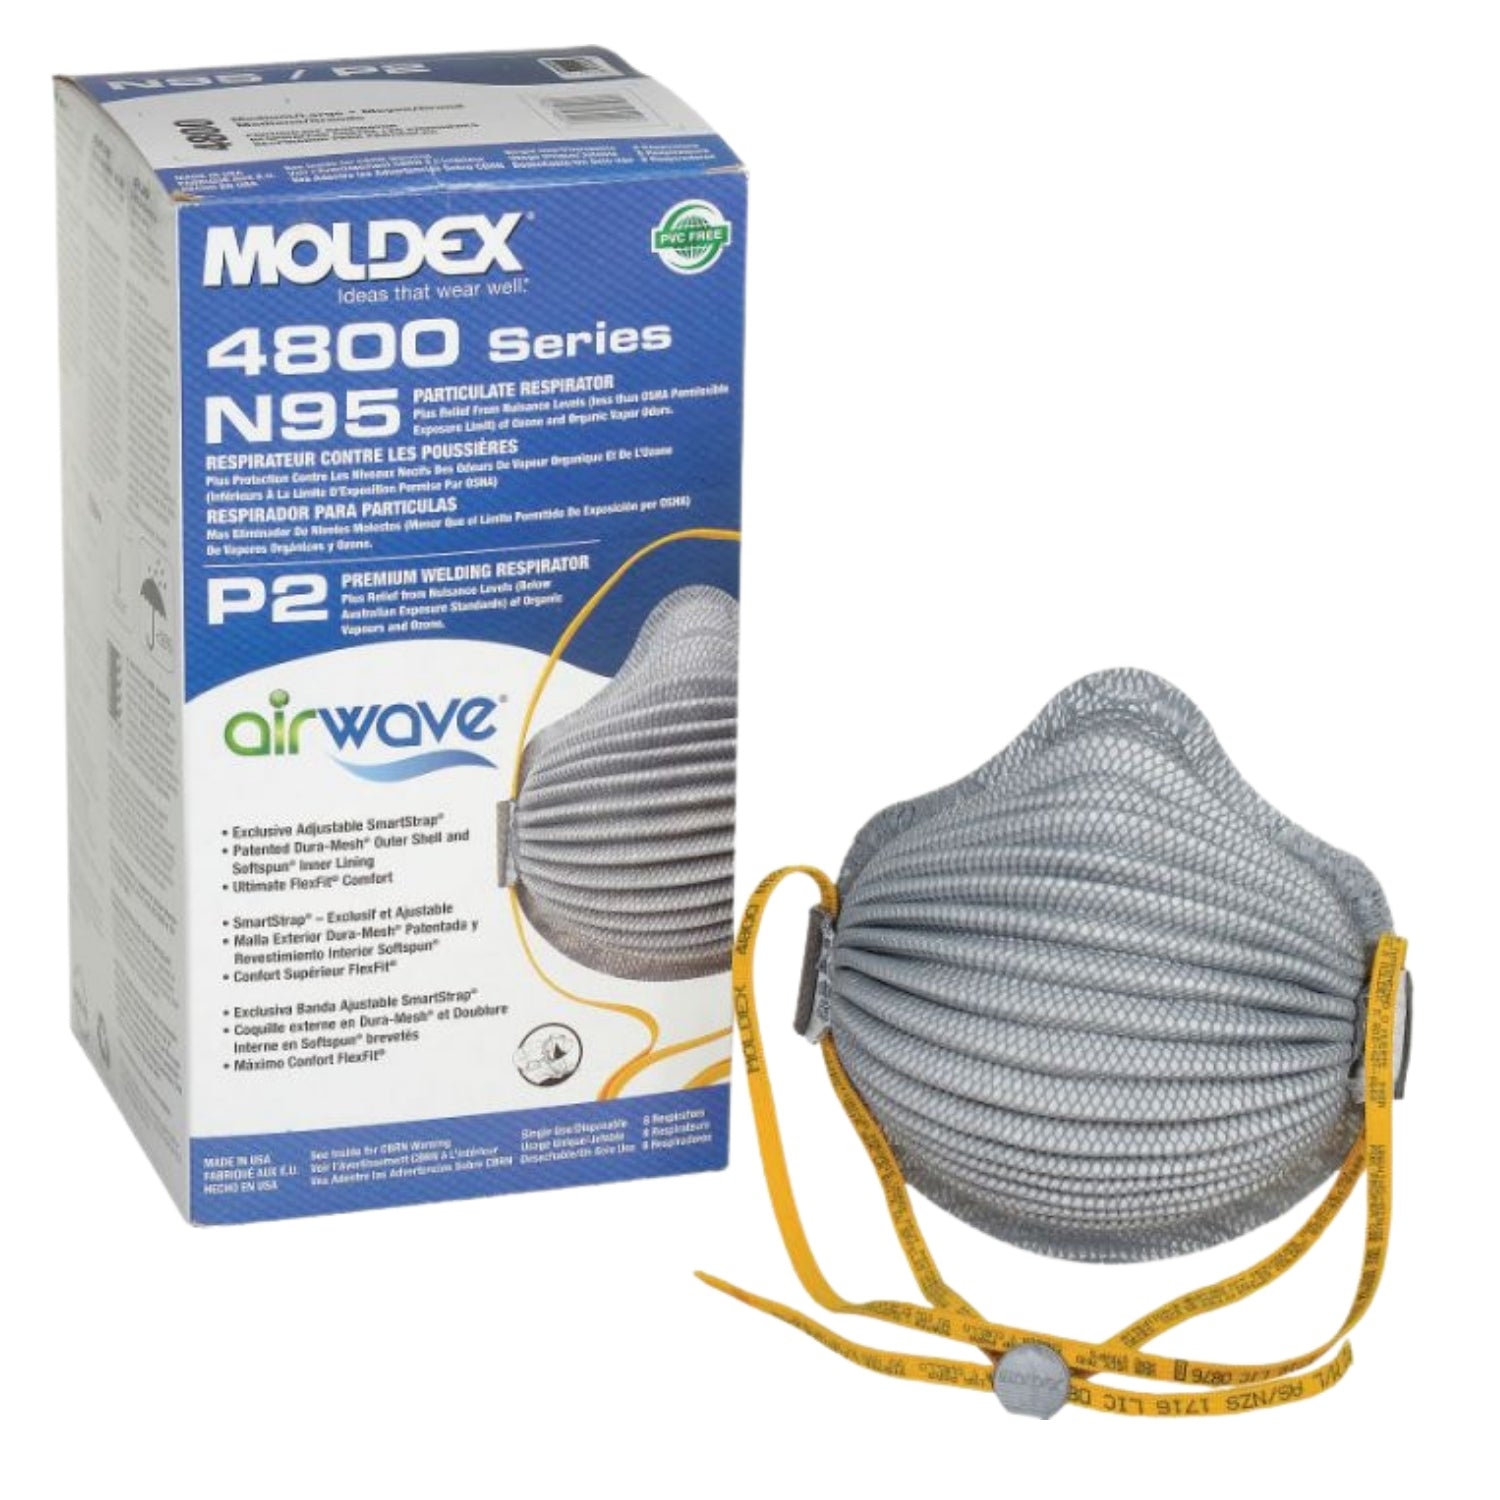 MOLDEX 4800 N95 Plus Relief From Organic Vapors AirWave Series With SmartStrap® & Full Foam Face Seal - 8/BOX